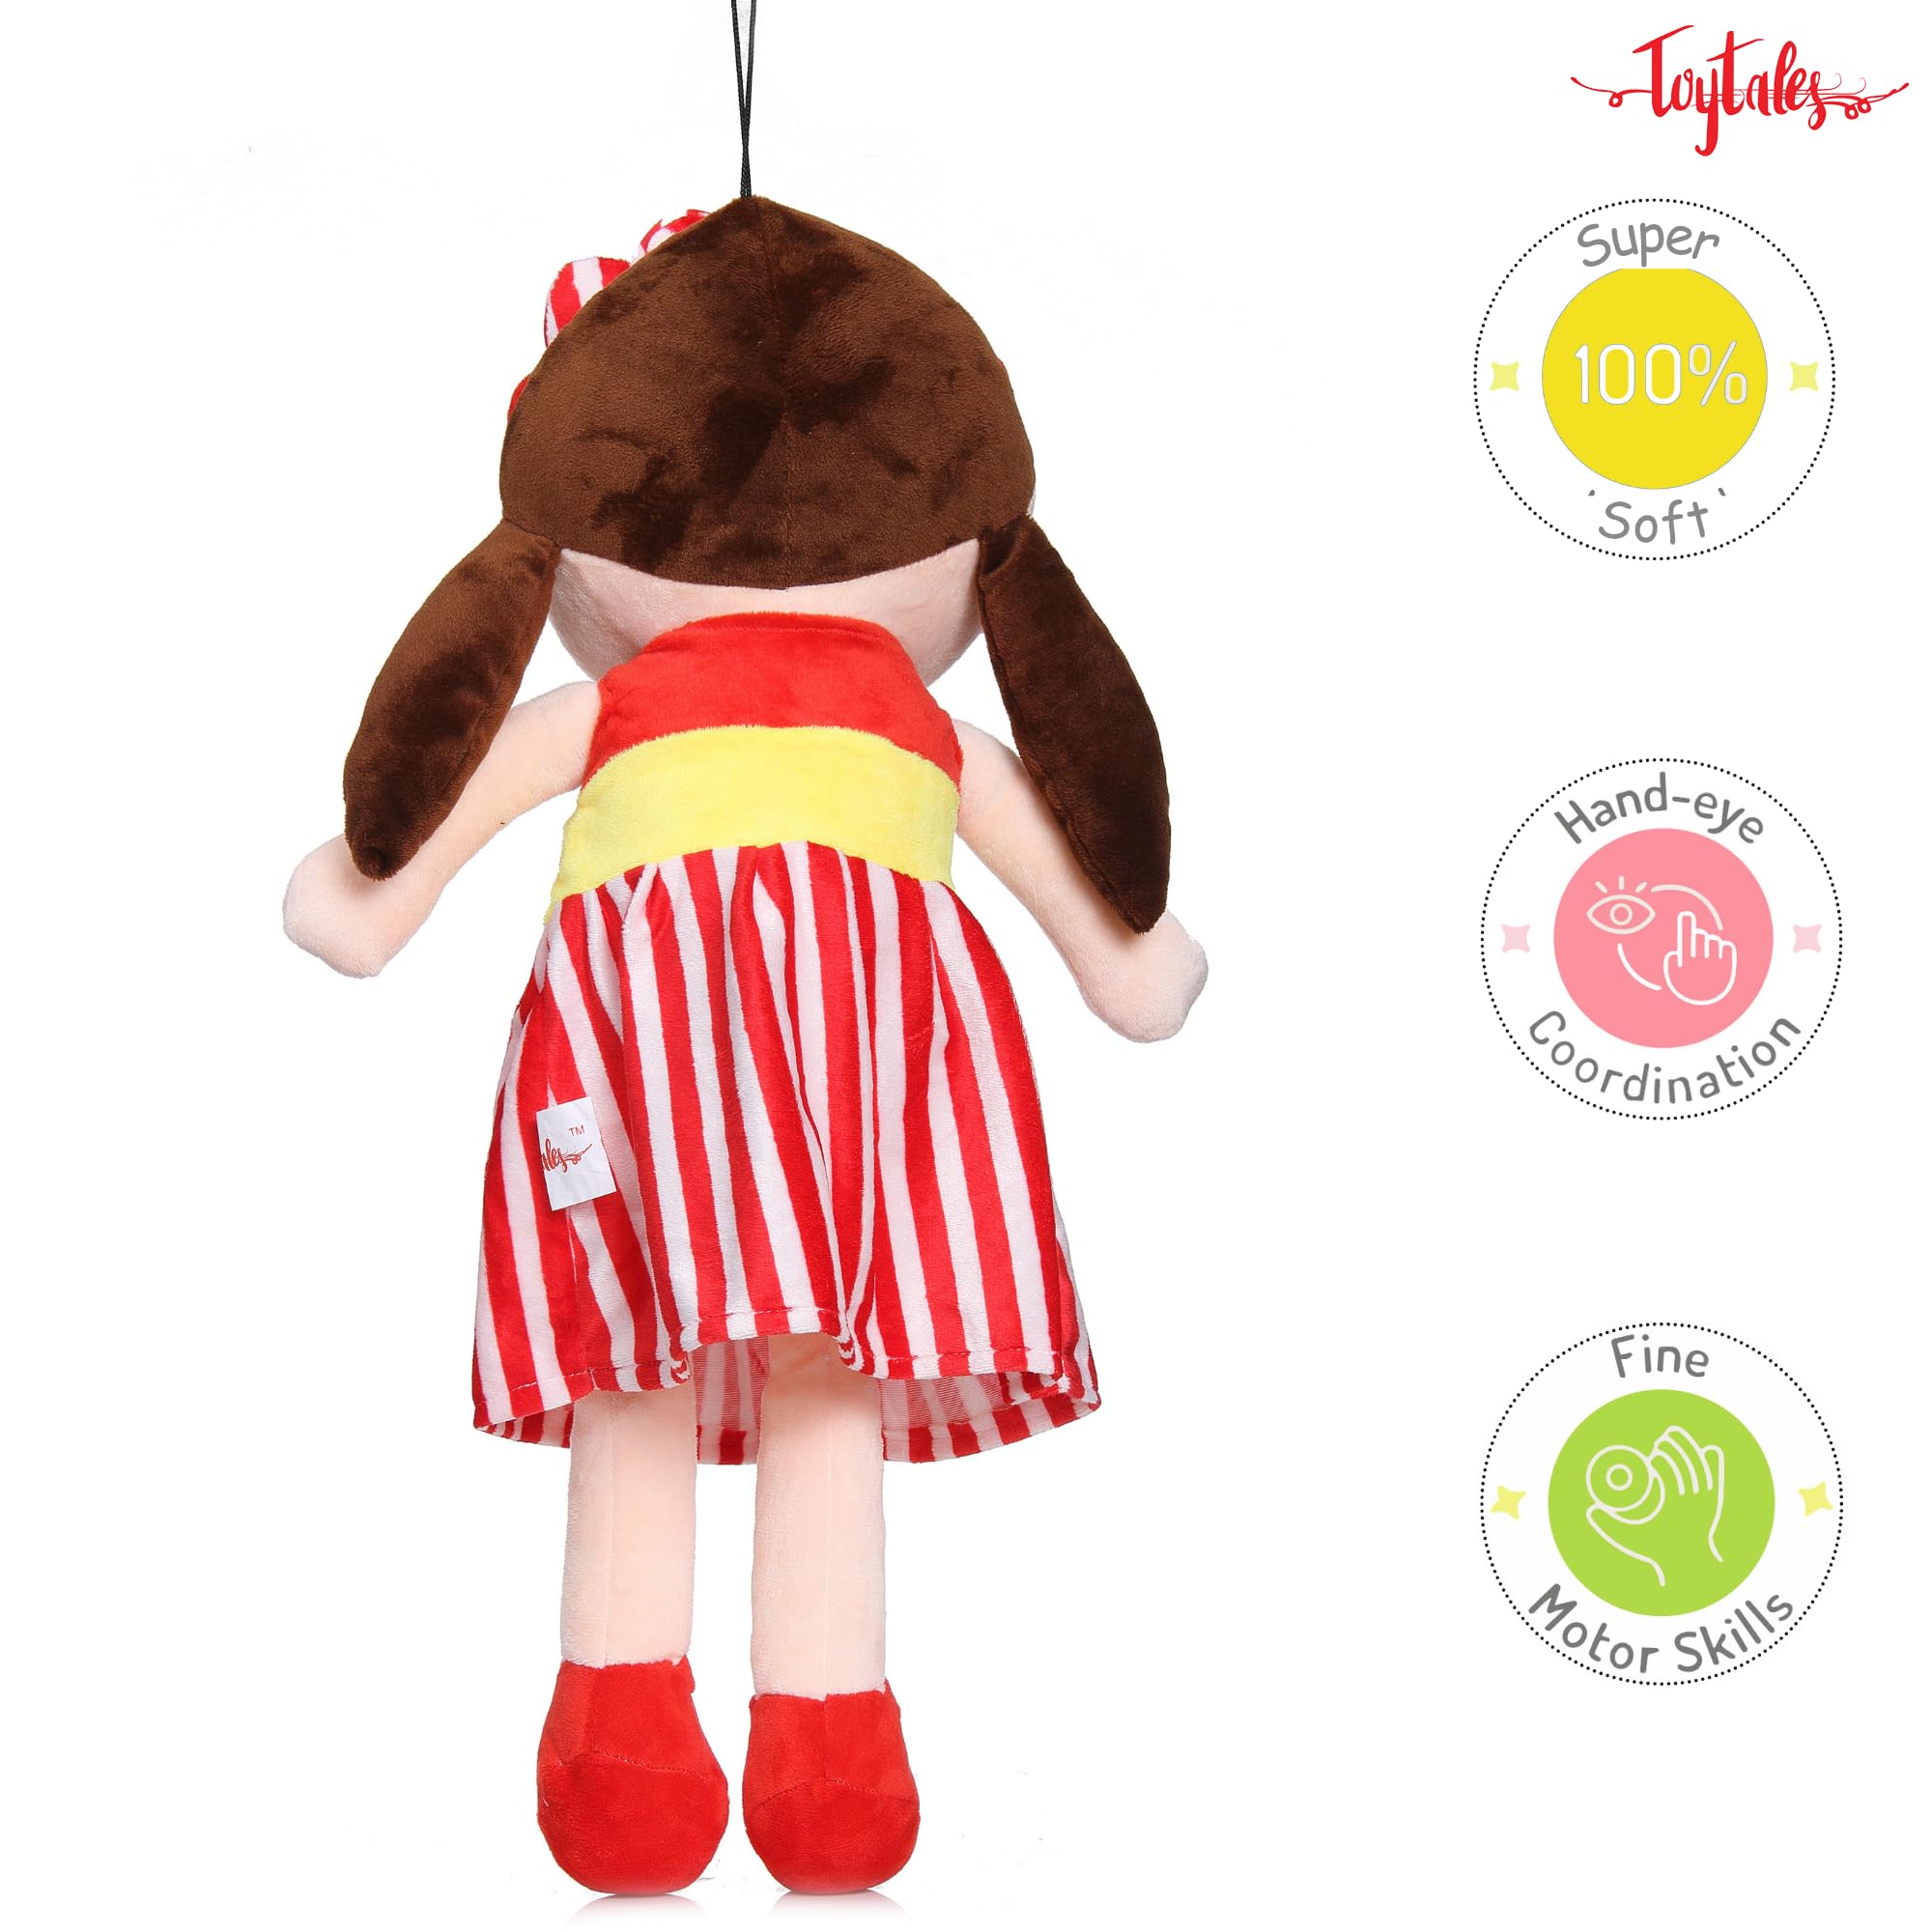 Cute Super Soft Stuffed Doll Medium Size 60cm, Cuddly Squishy Dolls, Plush Toy for Baby Girls, Spark Imaginative Play, Safe & Fun Gift for Kids, Perfect for Playtime & Cuddling (Red)